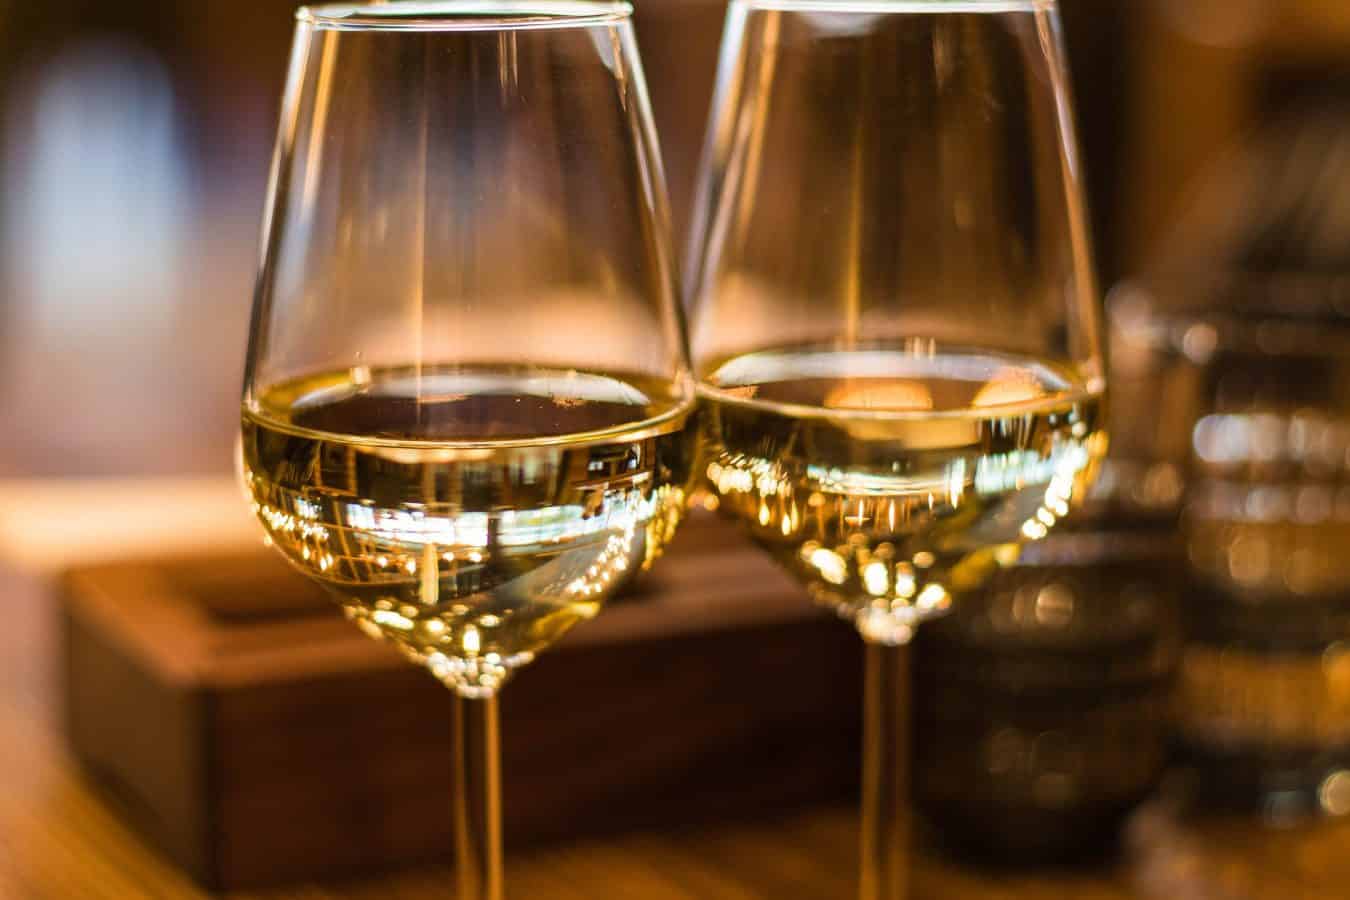 5 wines to try this Valentine’s Day